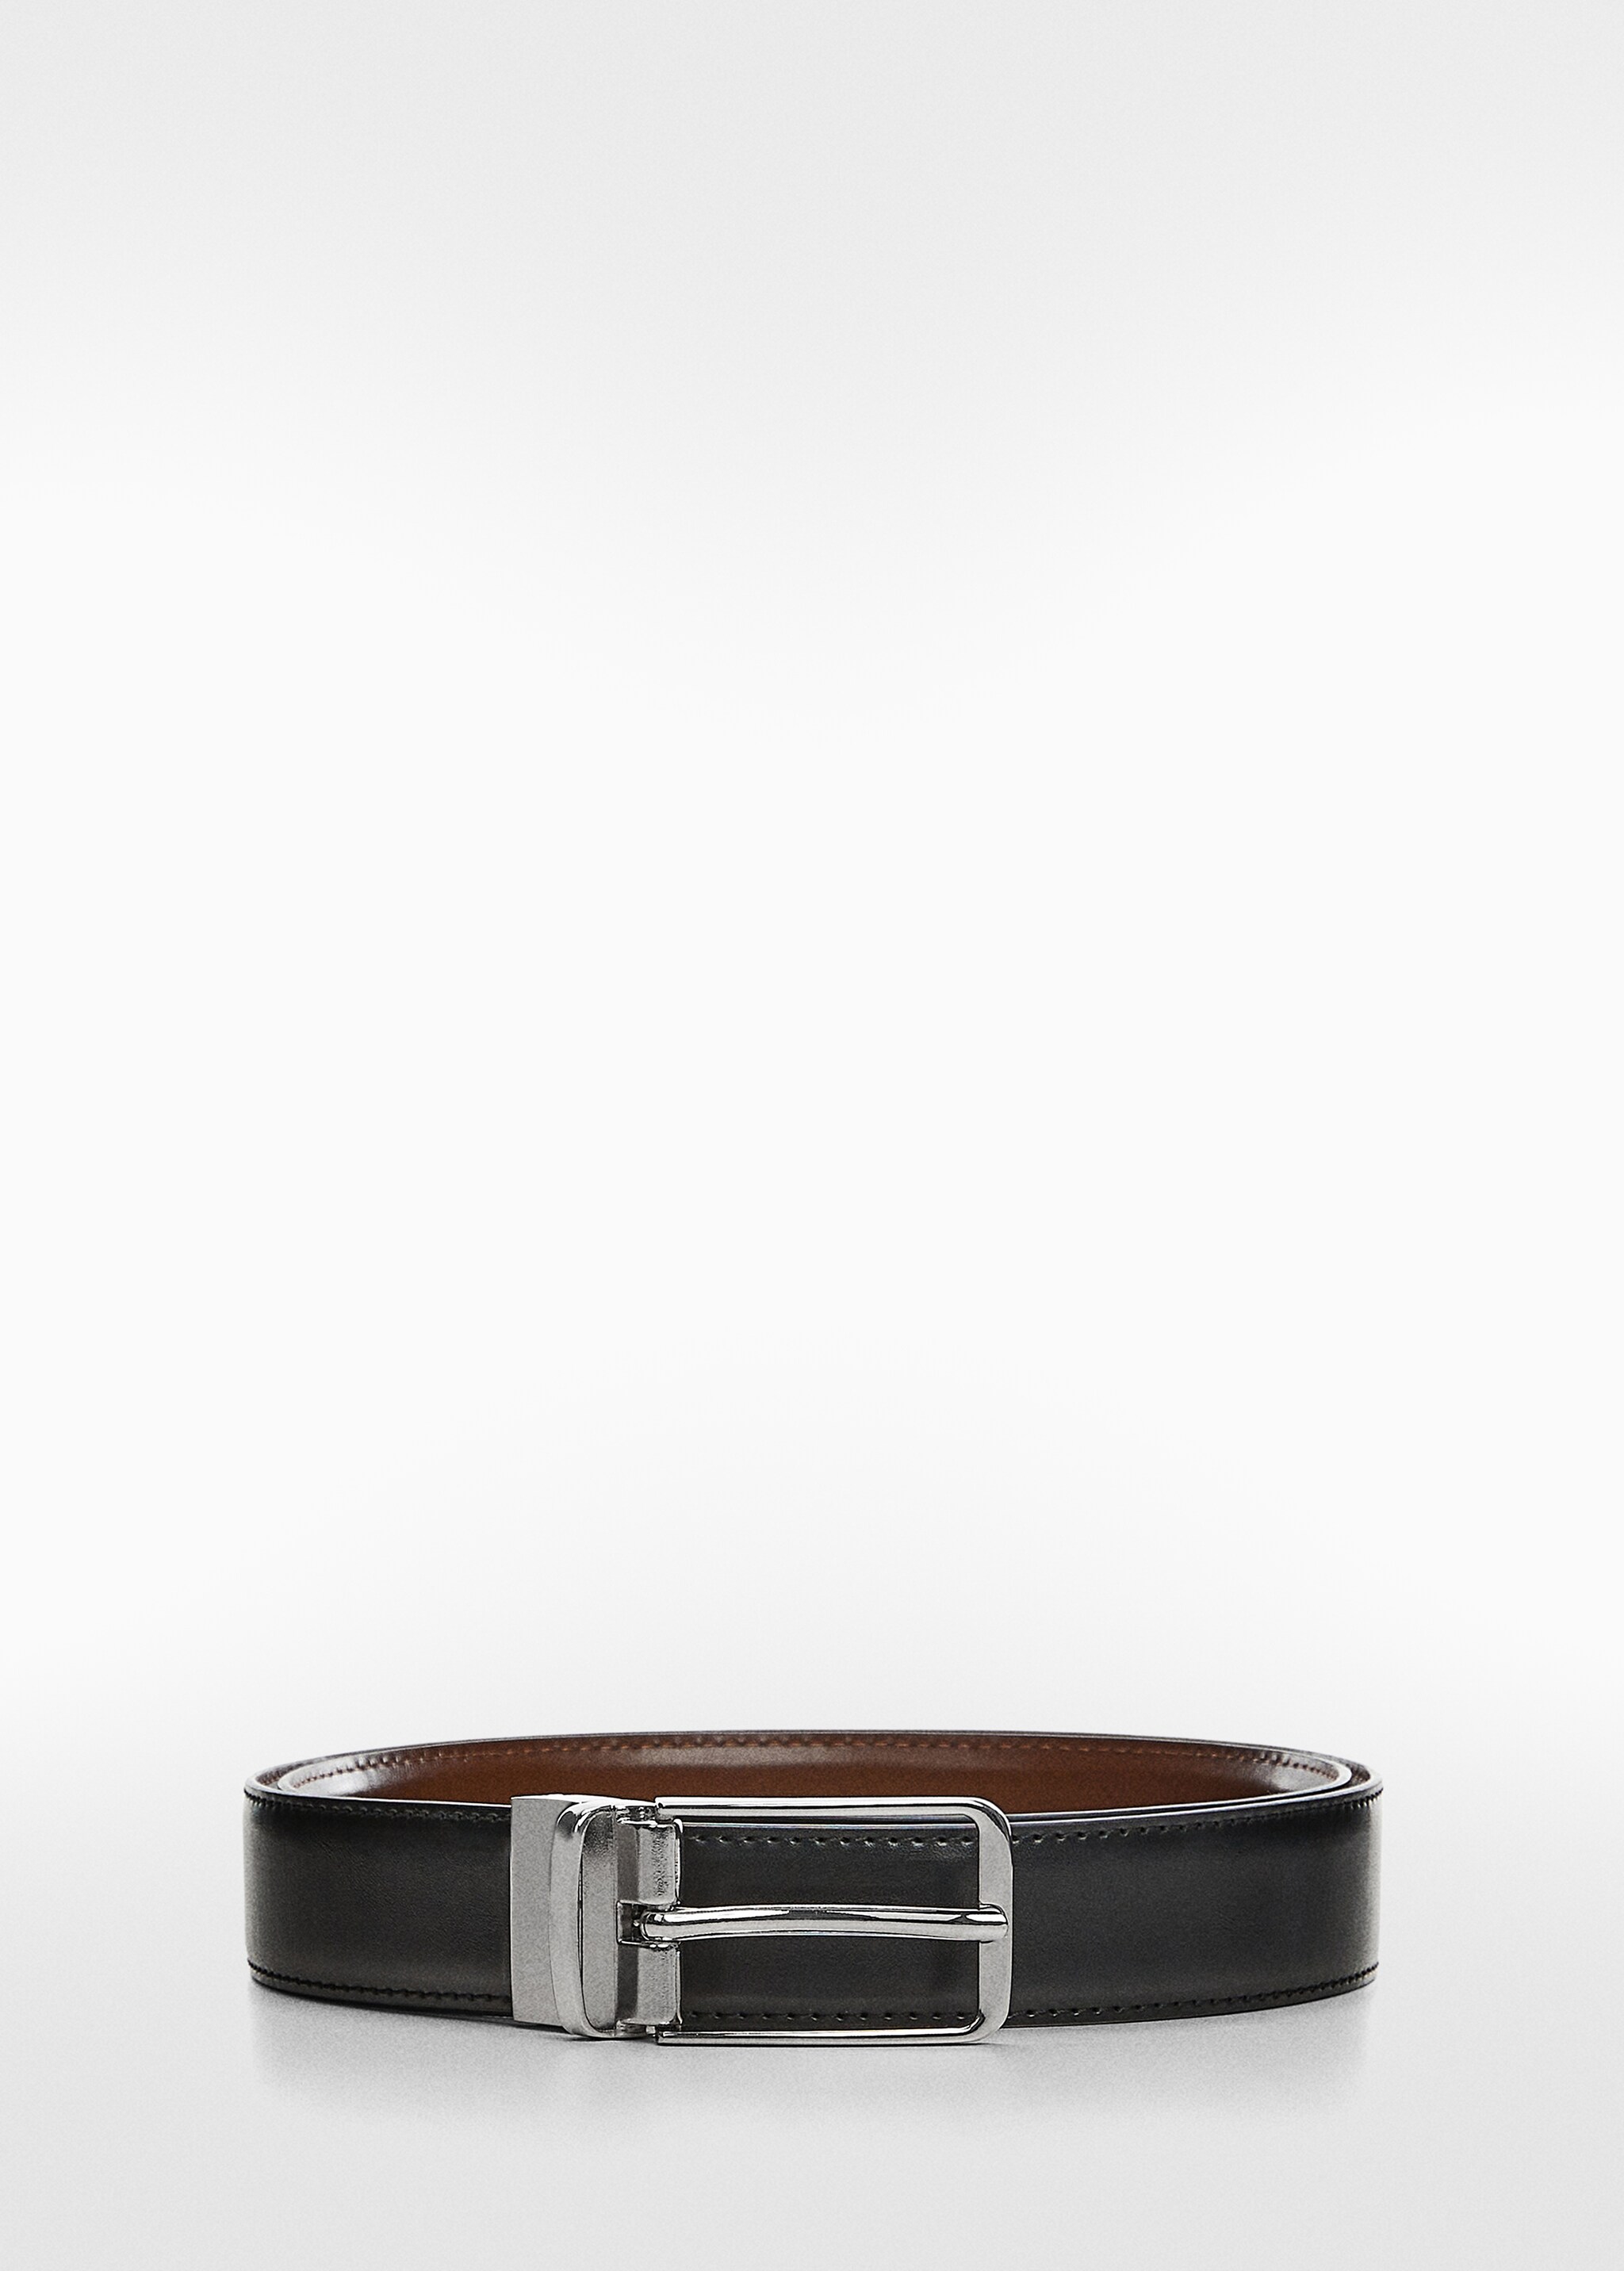 Leather reversible belt - Article without model